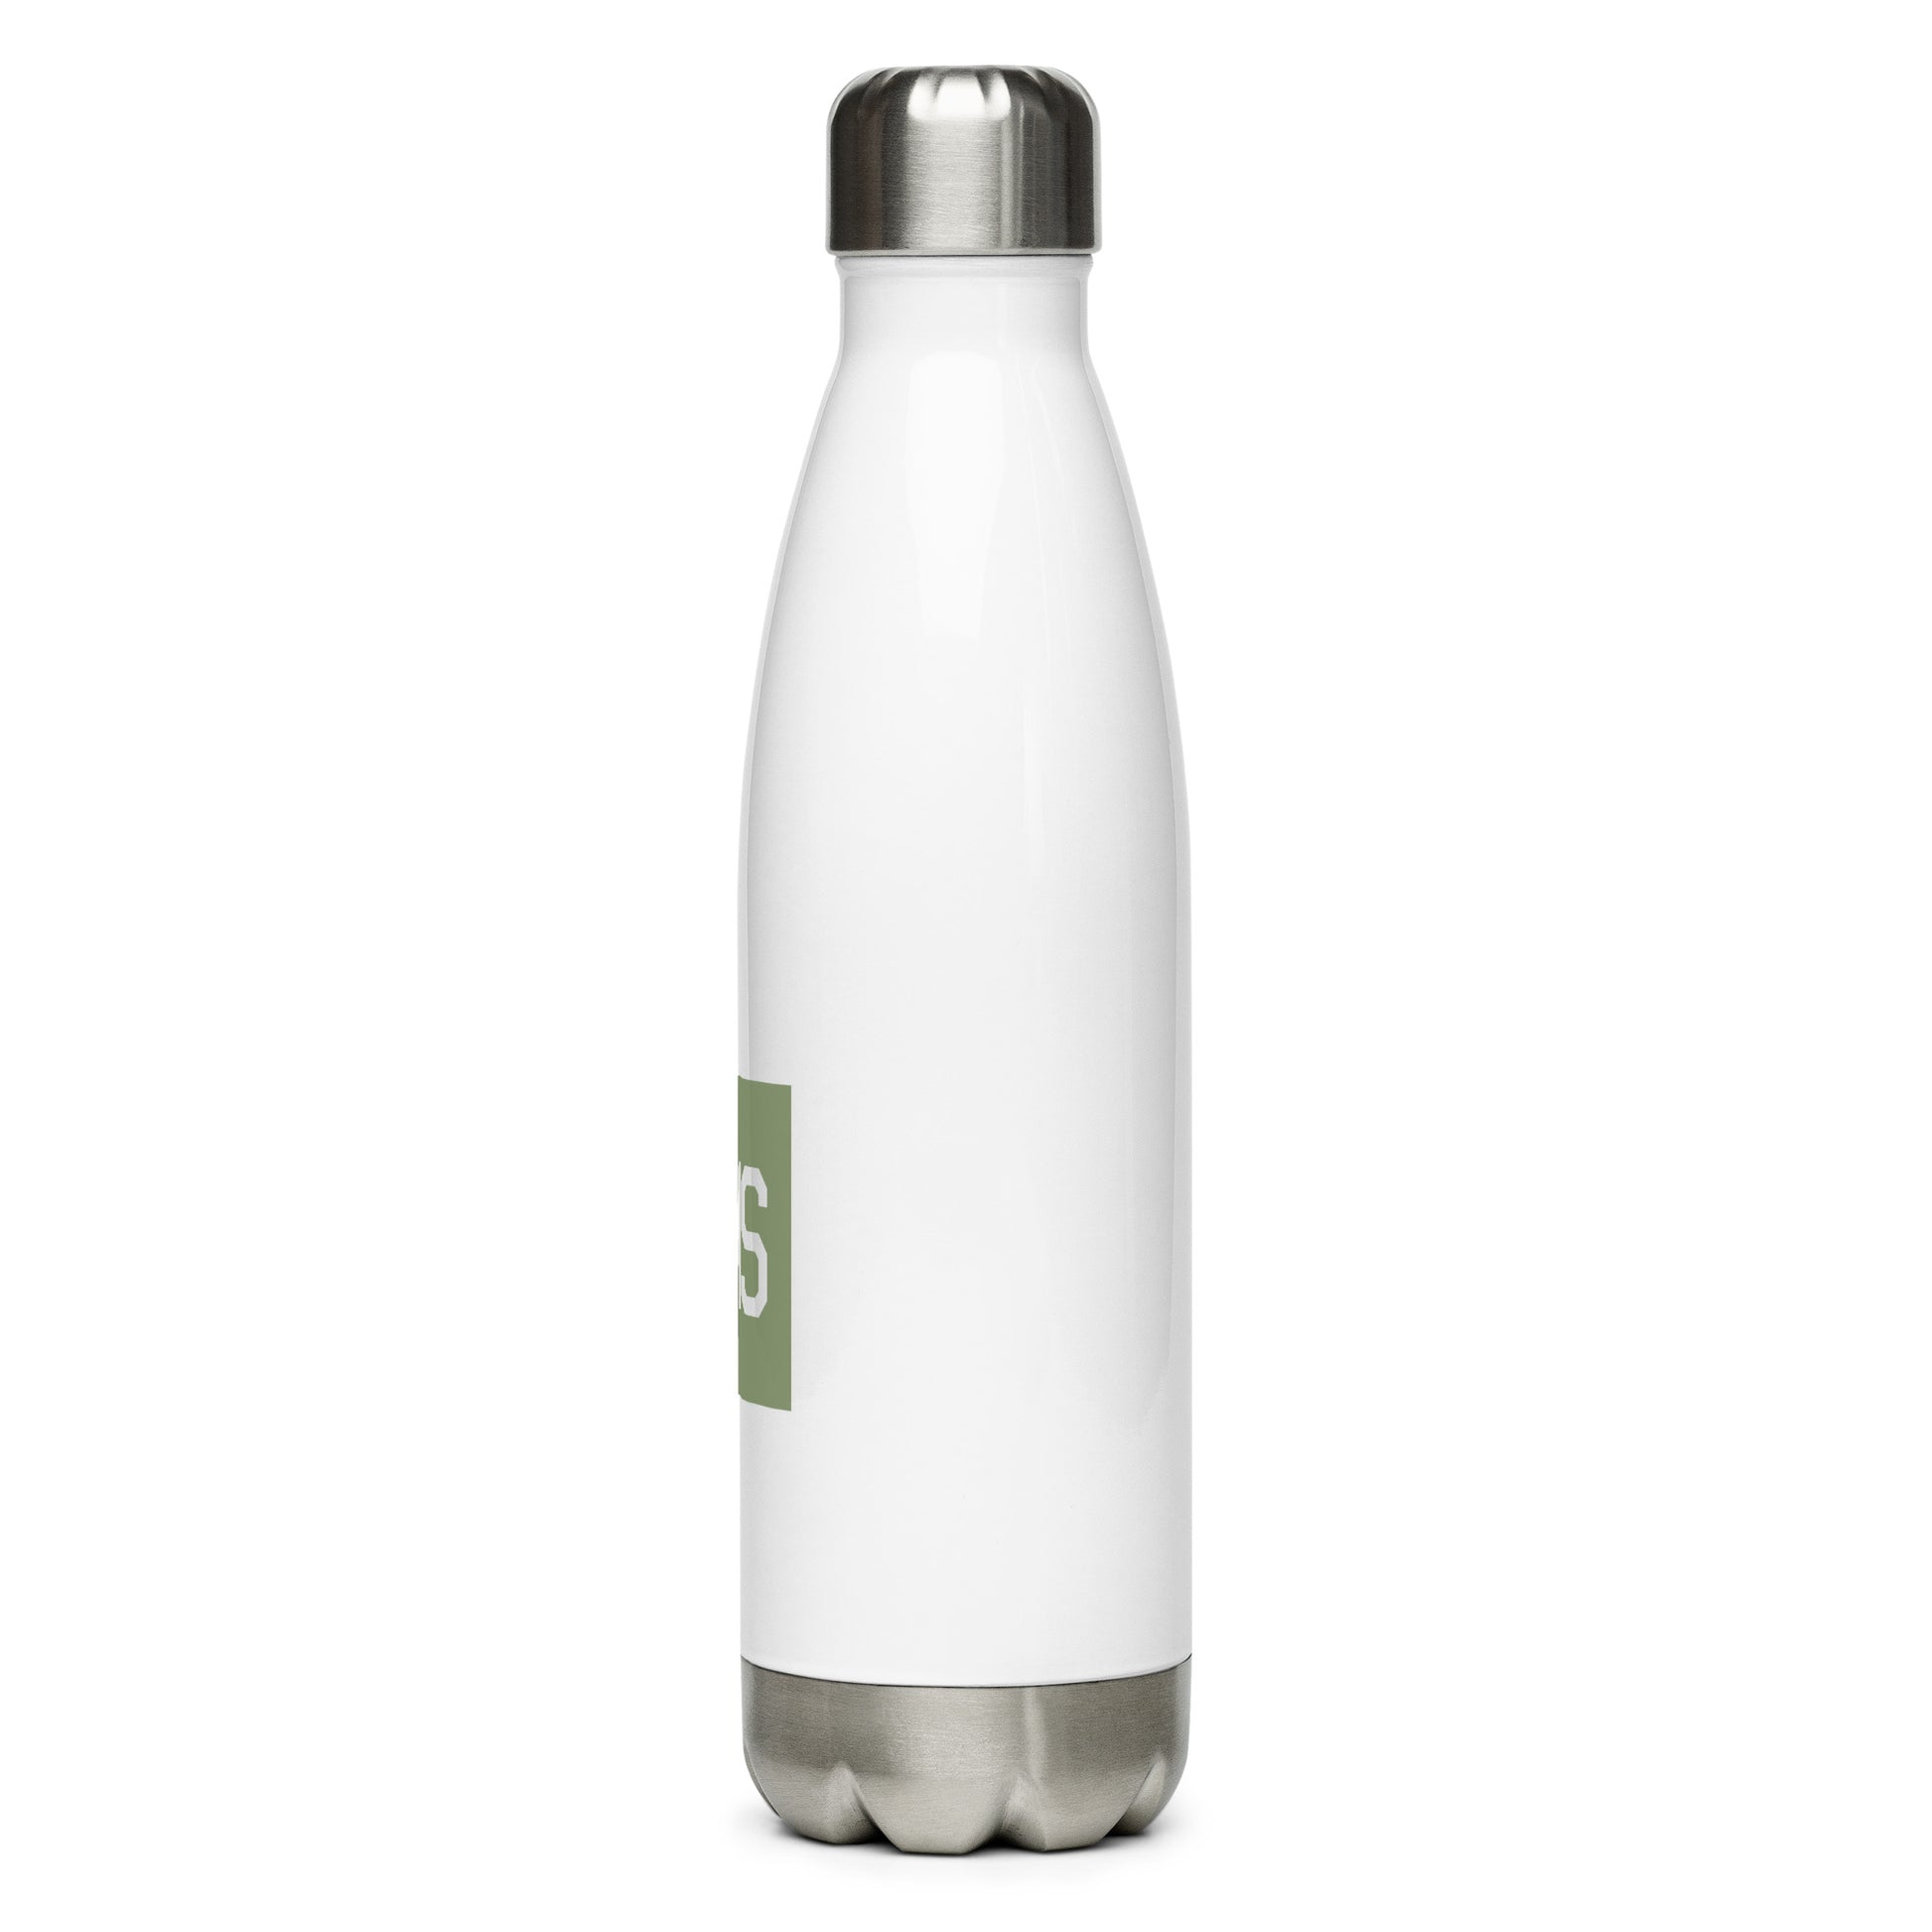 Aviation Gift Water Bottle - Camo Green • AMS Amsterdam • YHM Designs - Image 08